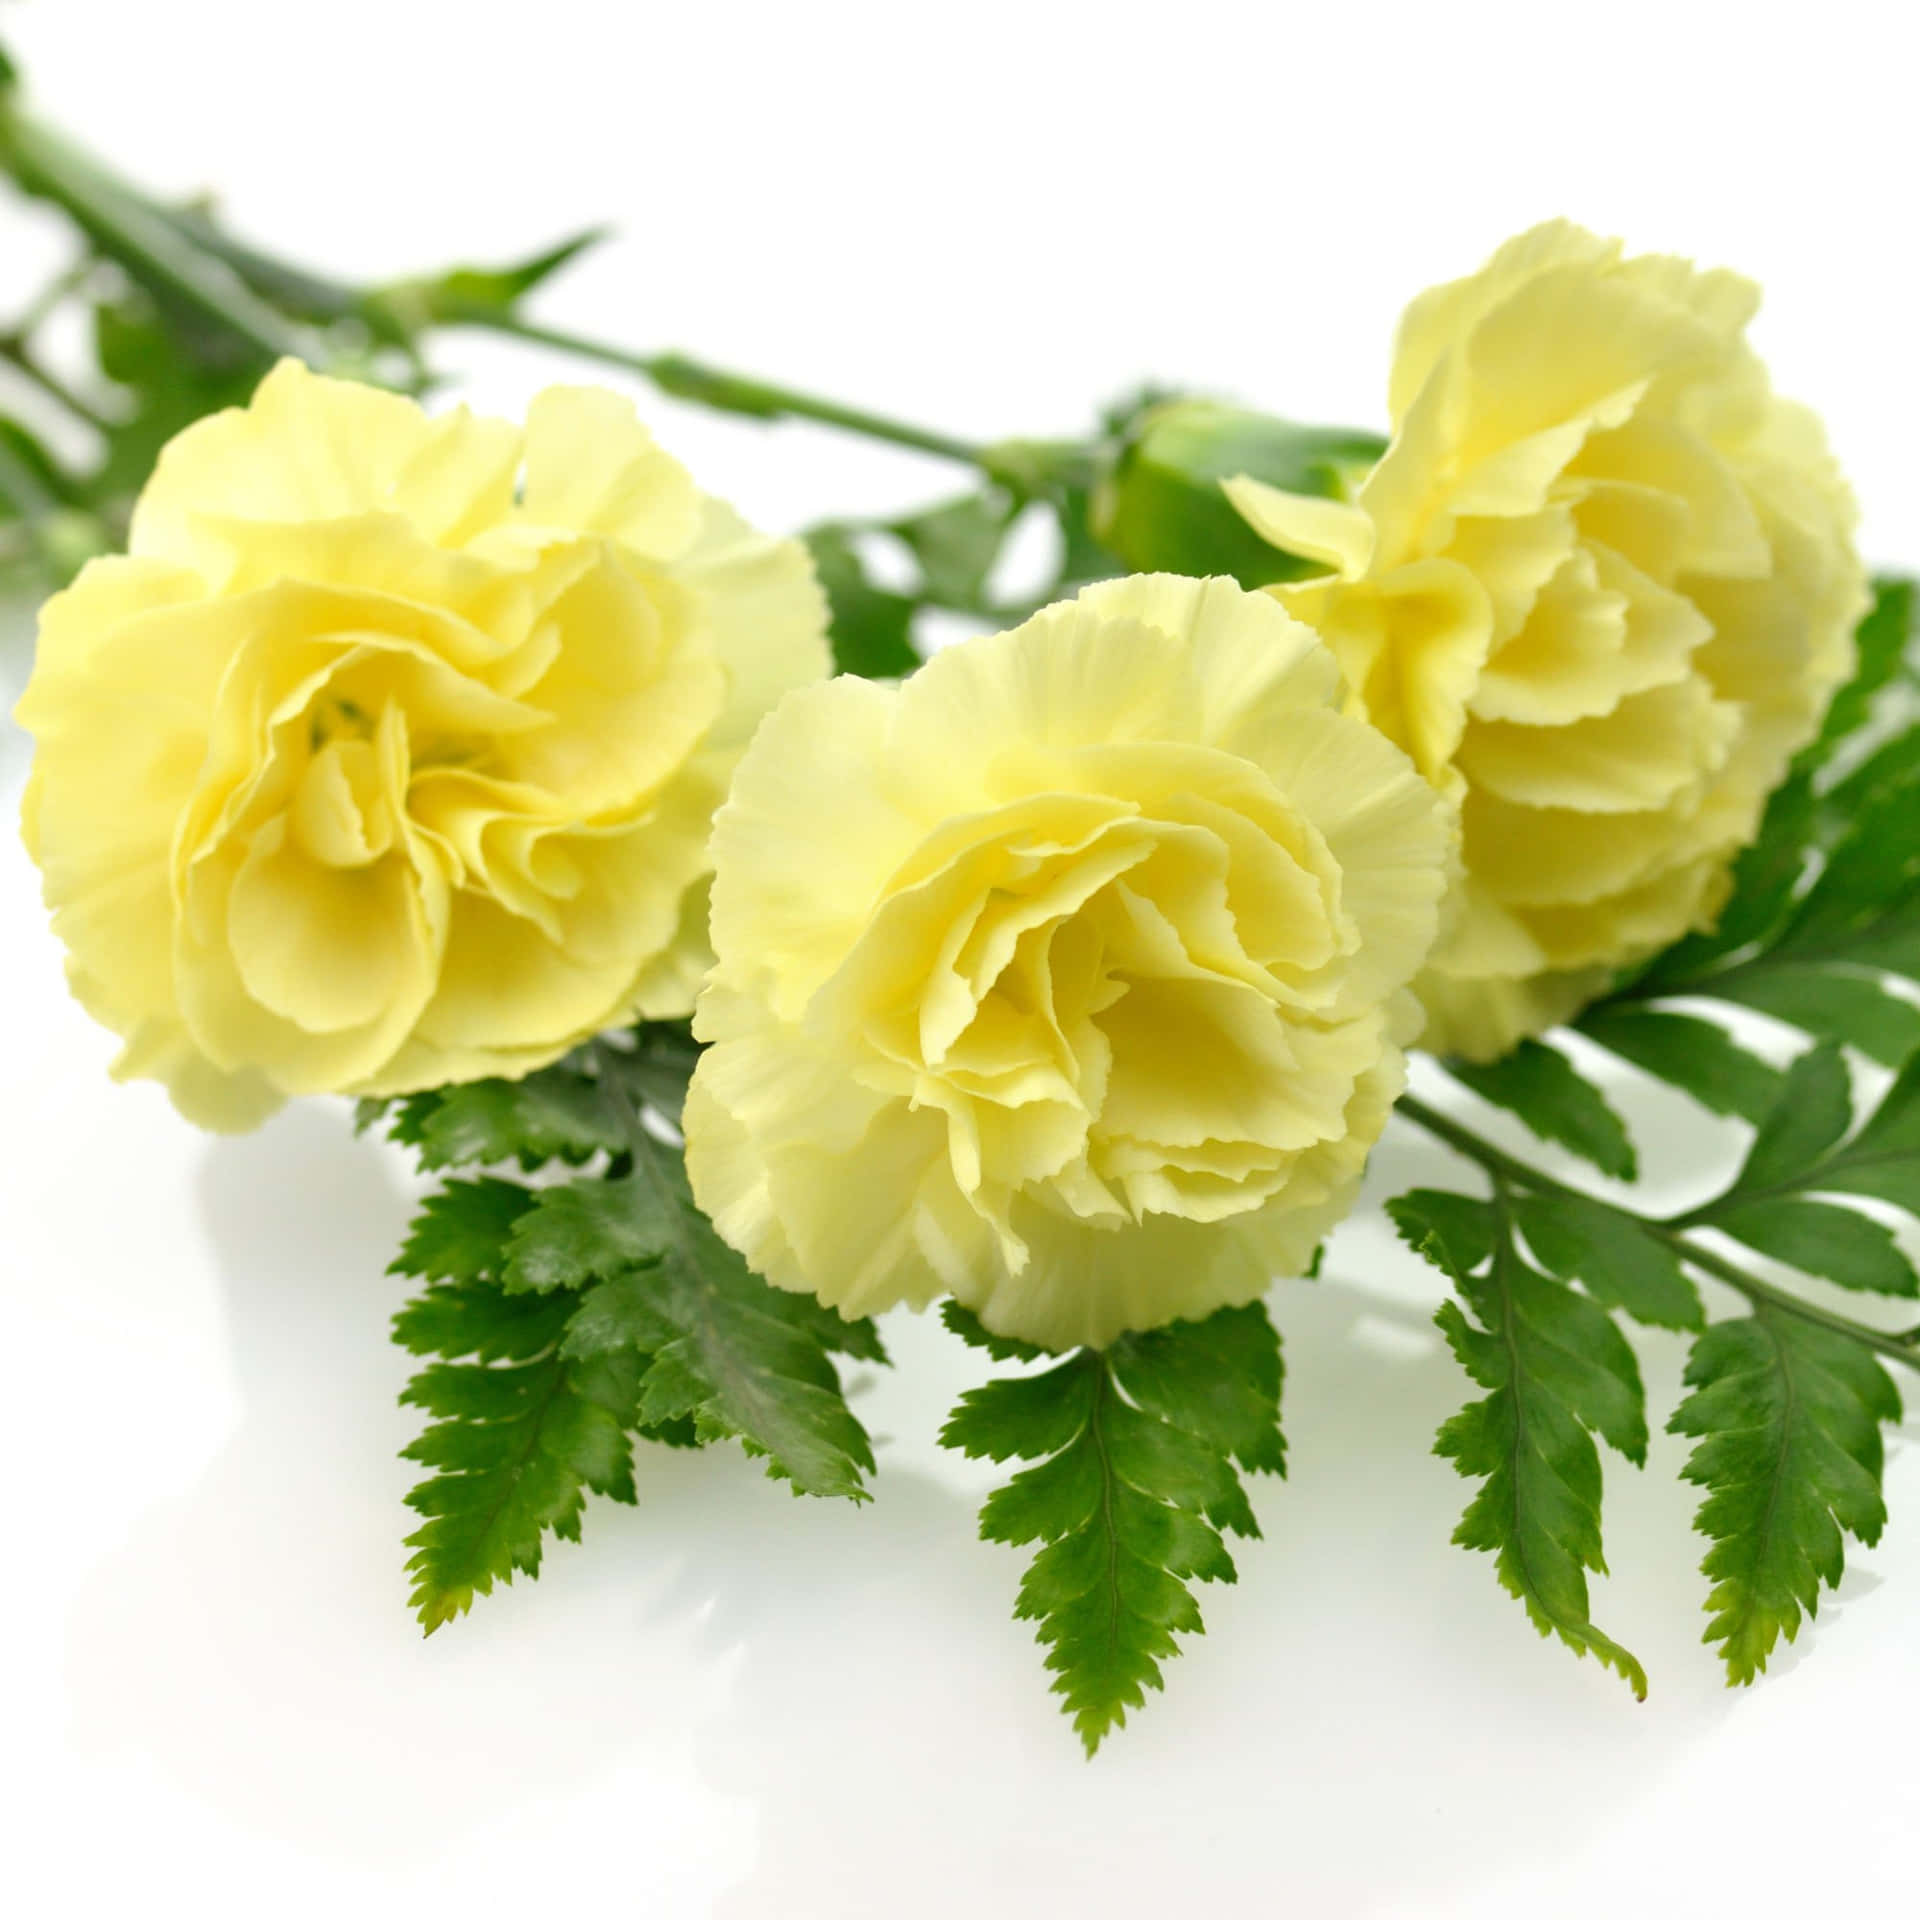 Three Yellow Carnations On A White Background